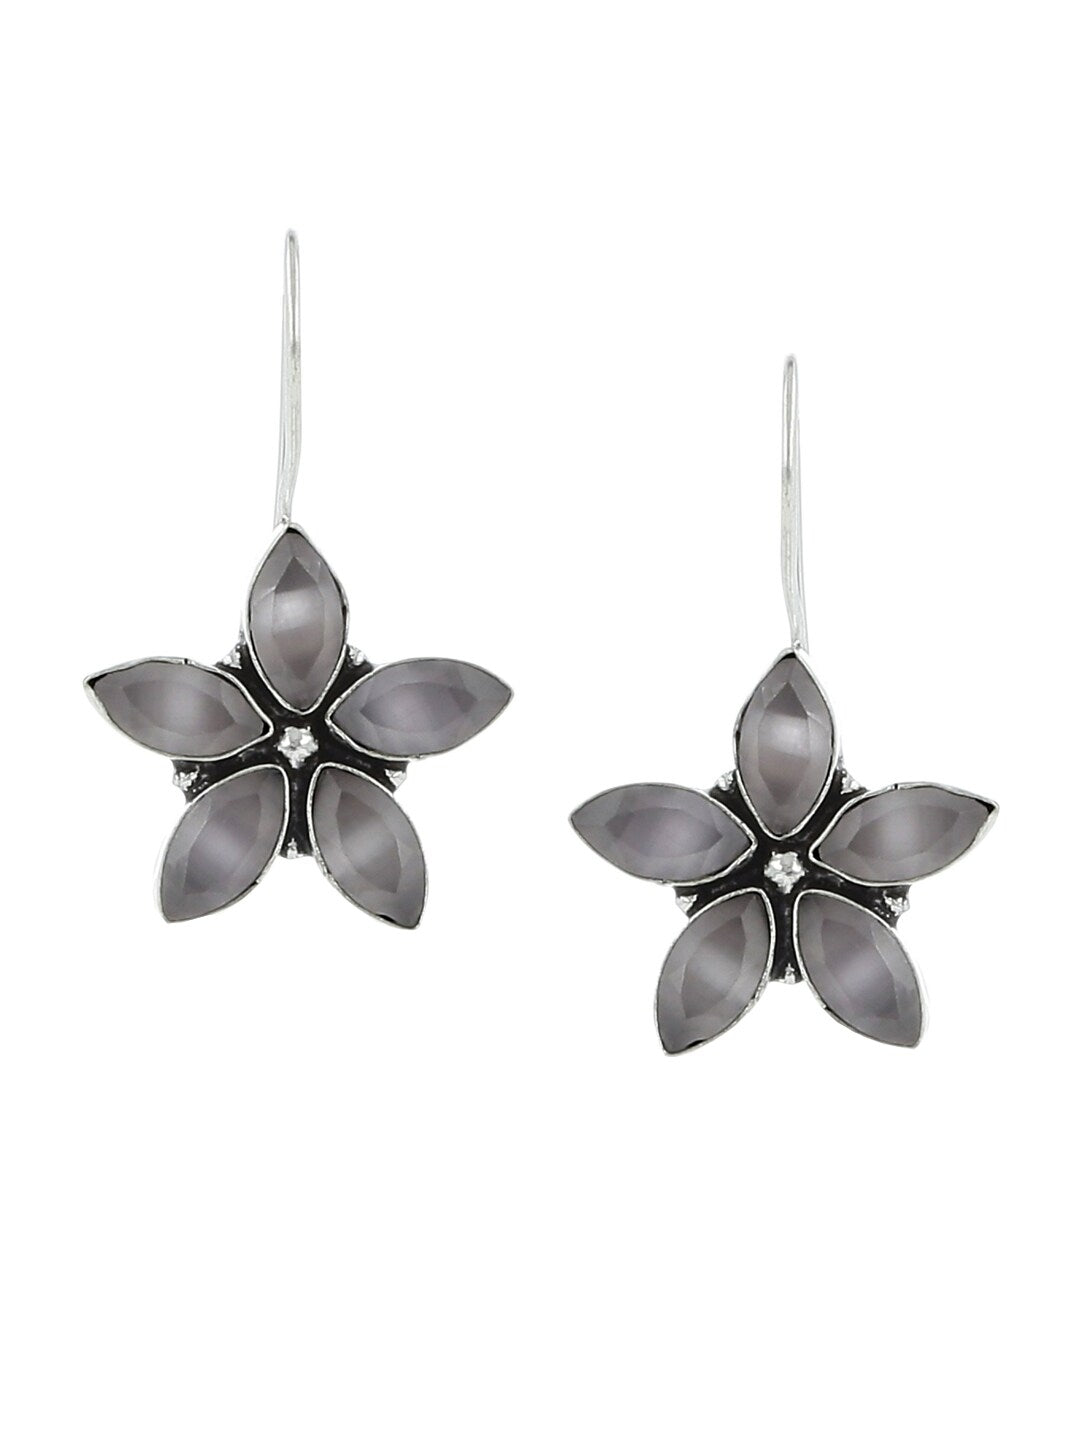 EL REGALO White Star Shaped Drop Earrings - for Women and Girls
Style ID: 17119250